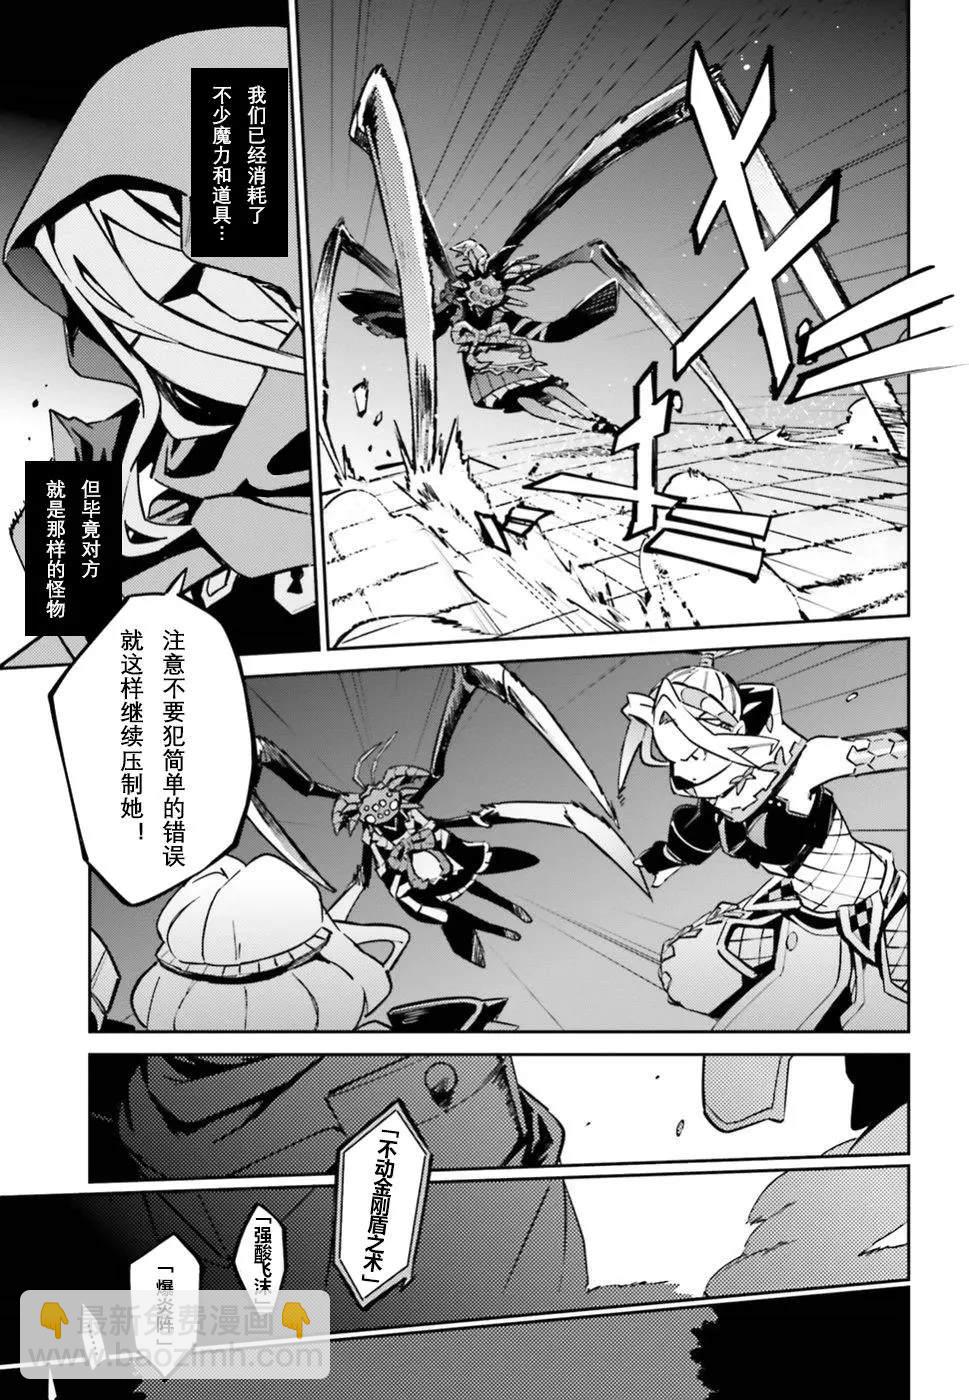 OVERLORD - 第46話 - 1